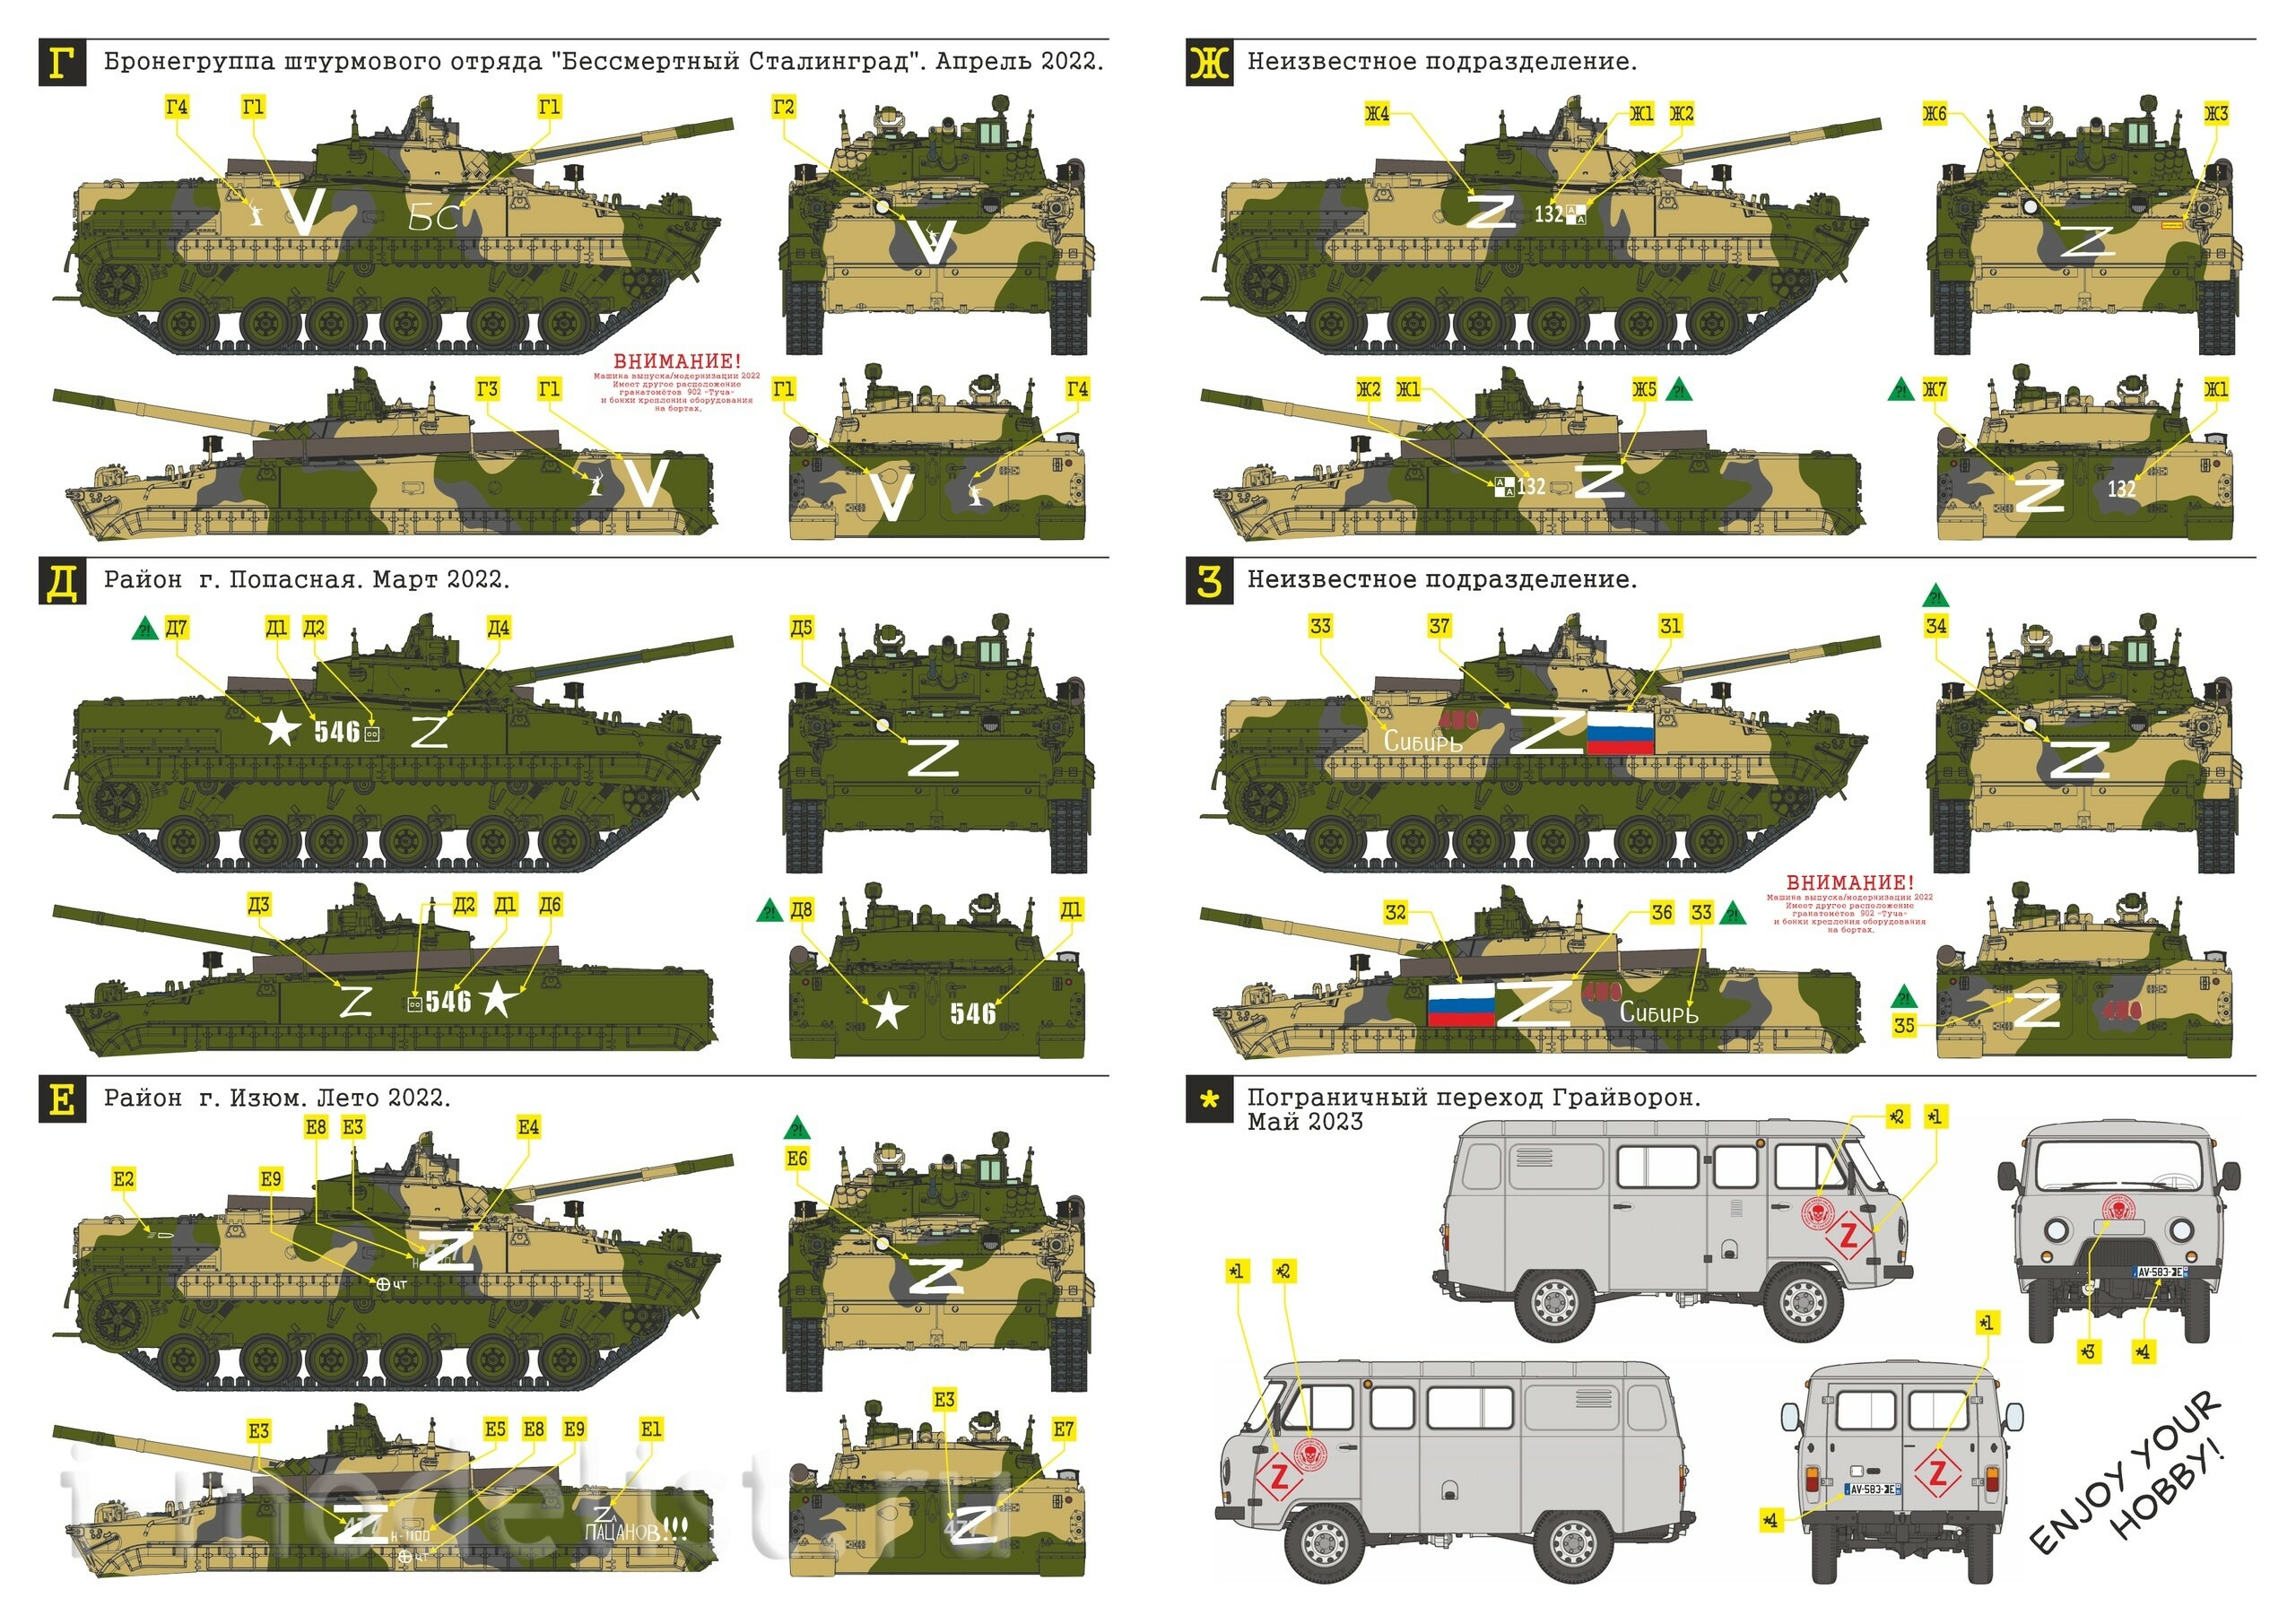 D35007 SG Modeling 1/35 Decal set for BMP-3 in its zone